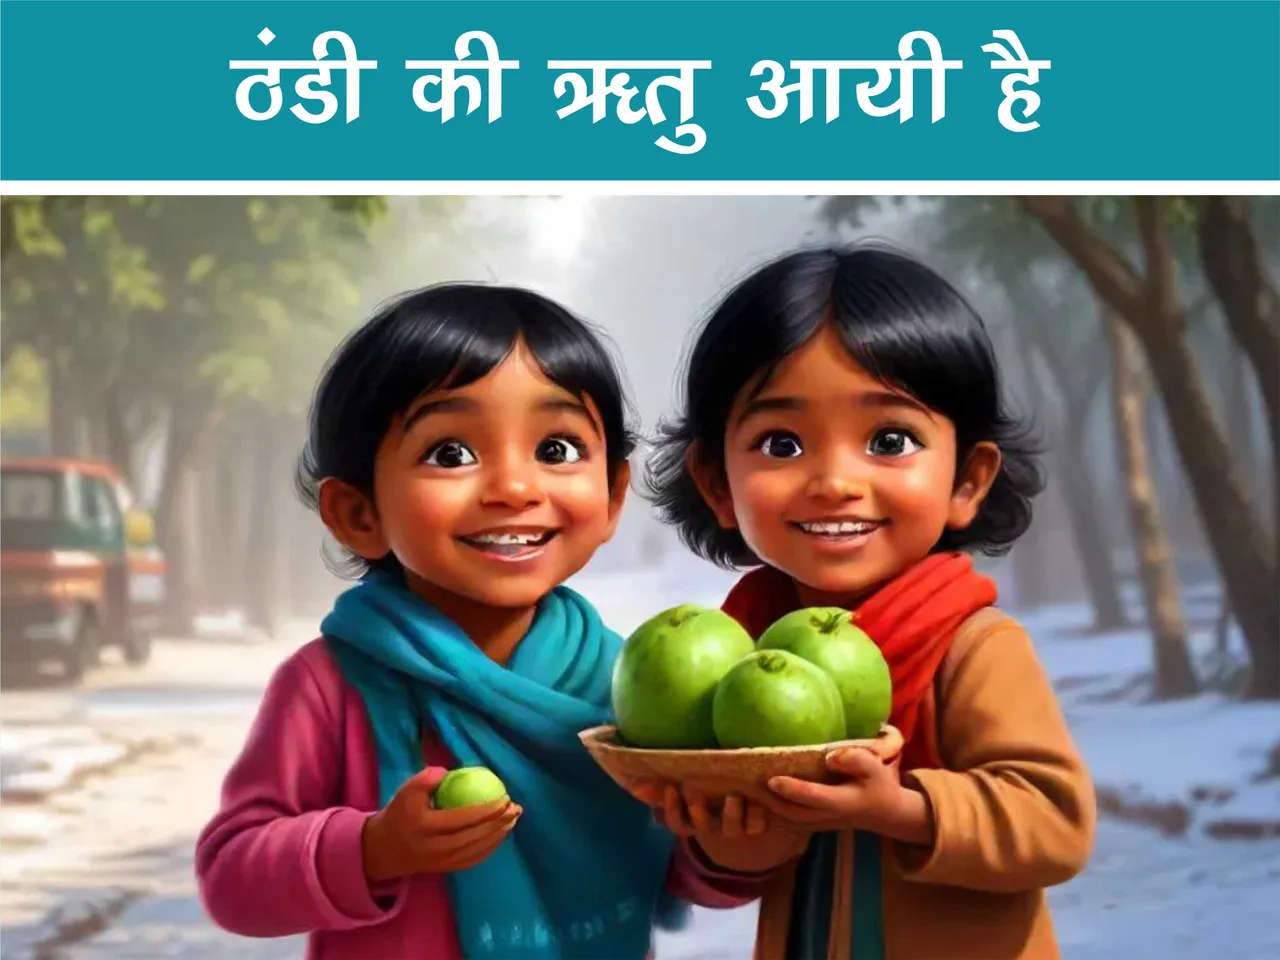 kids with guava in hand cartoon image